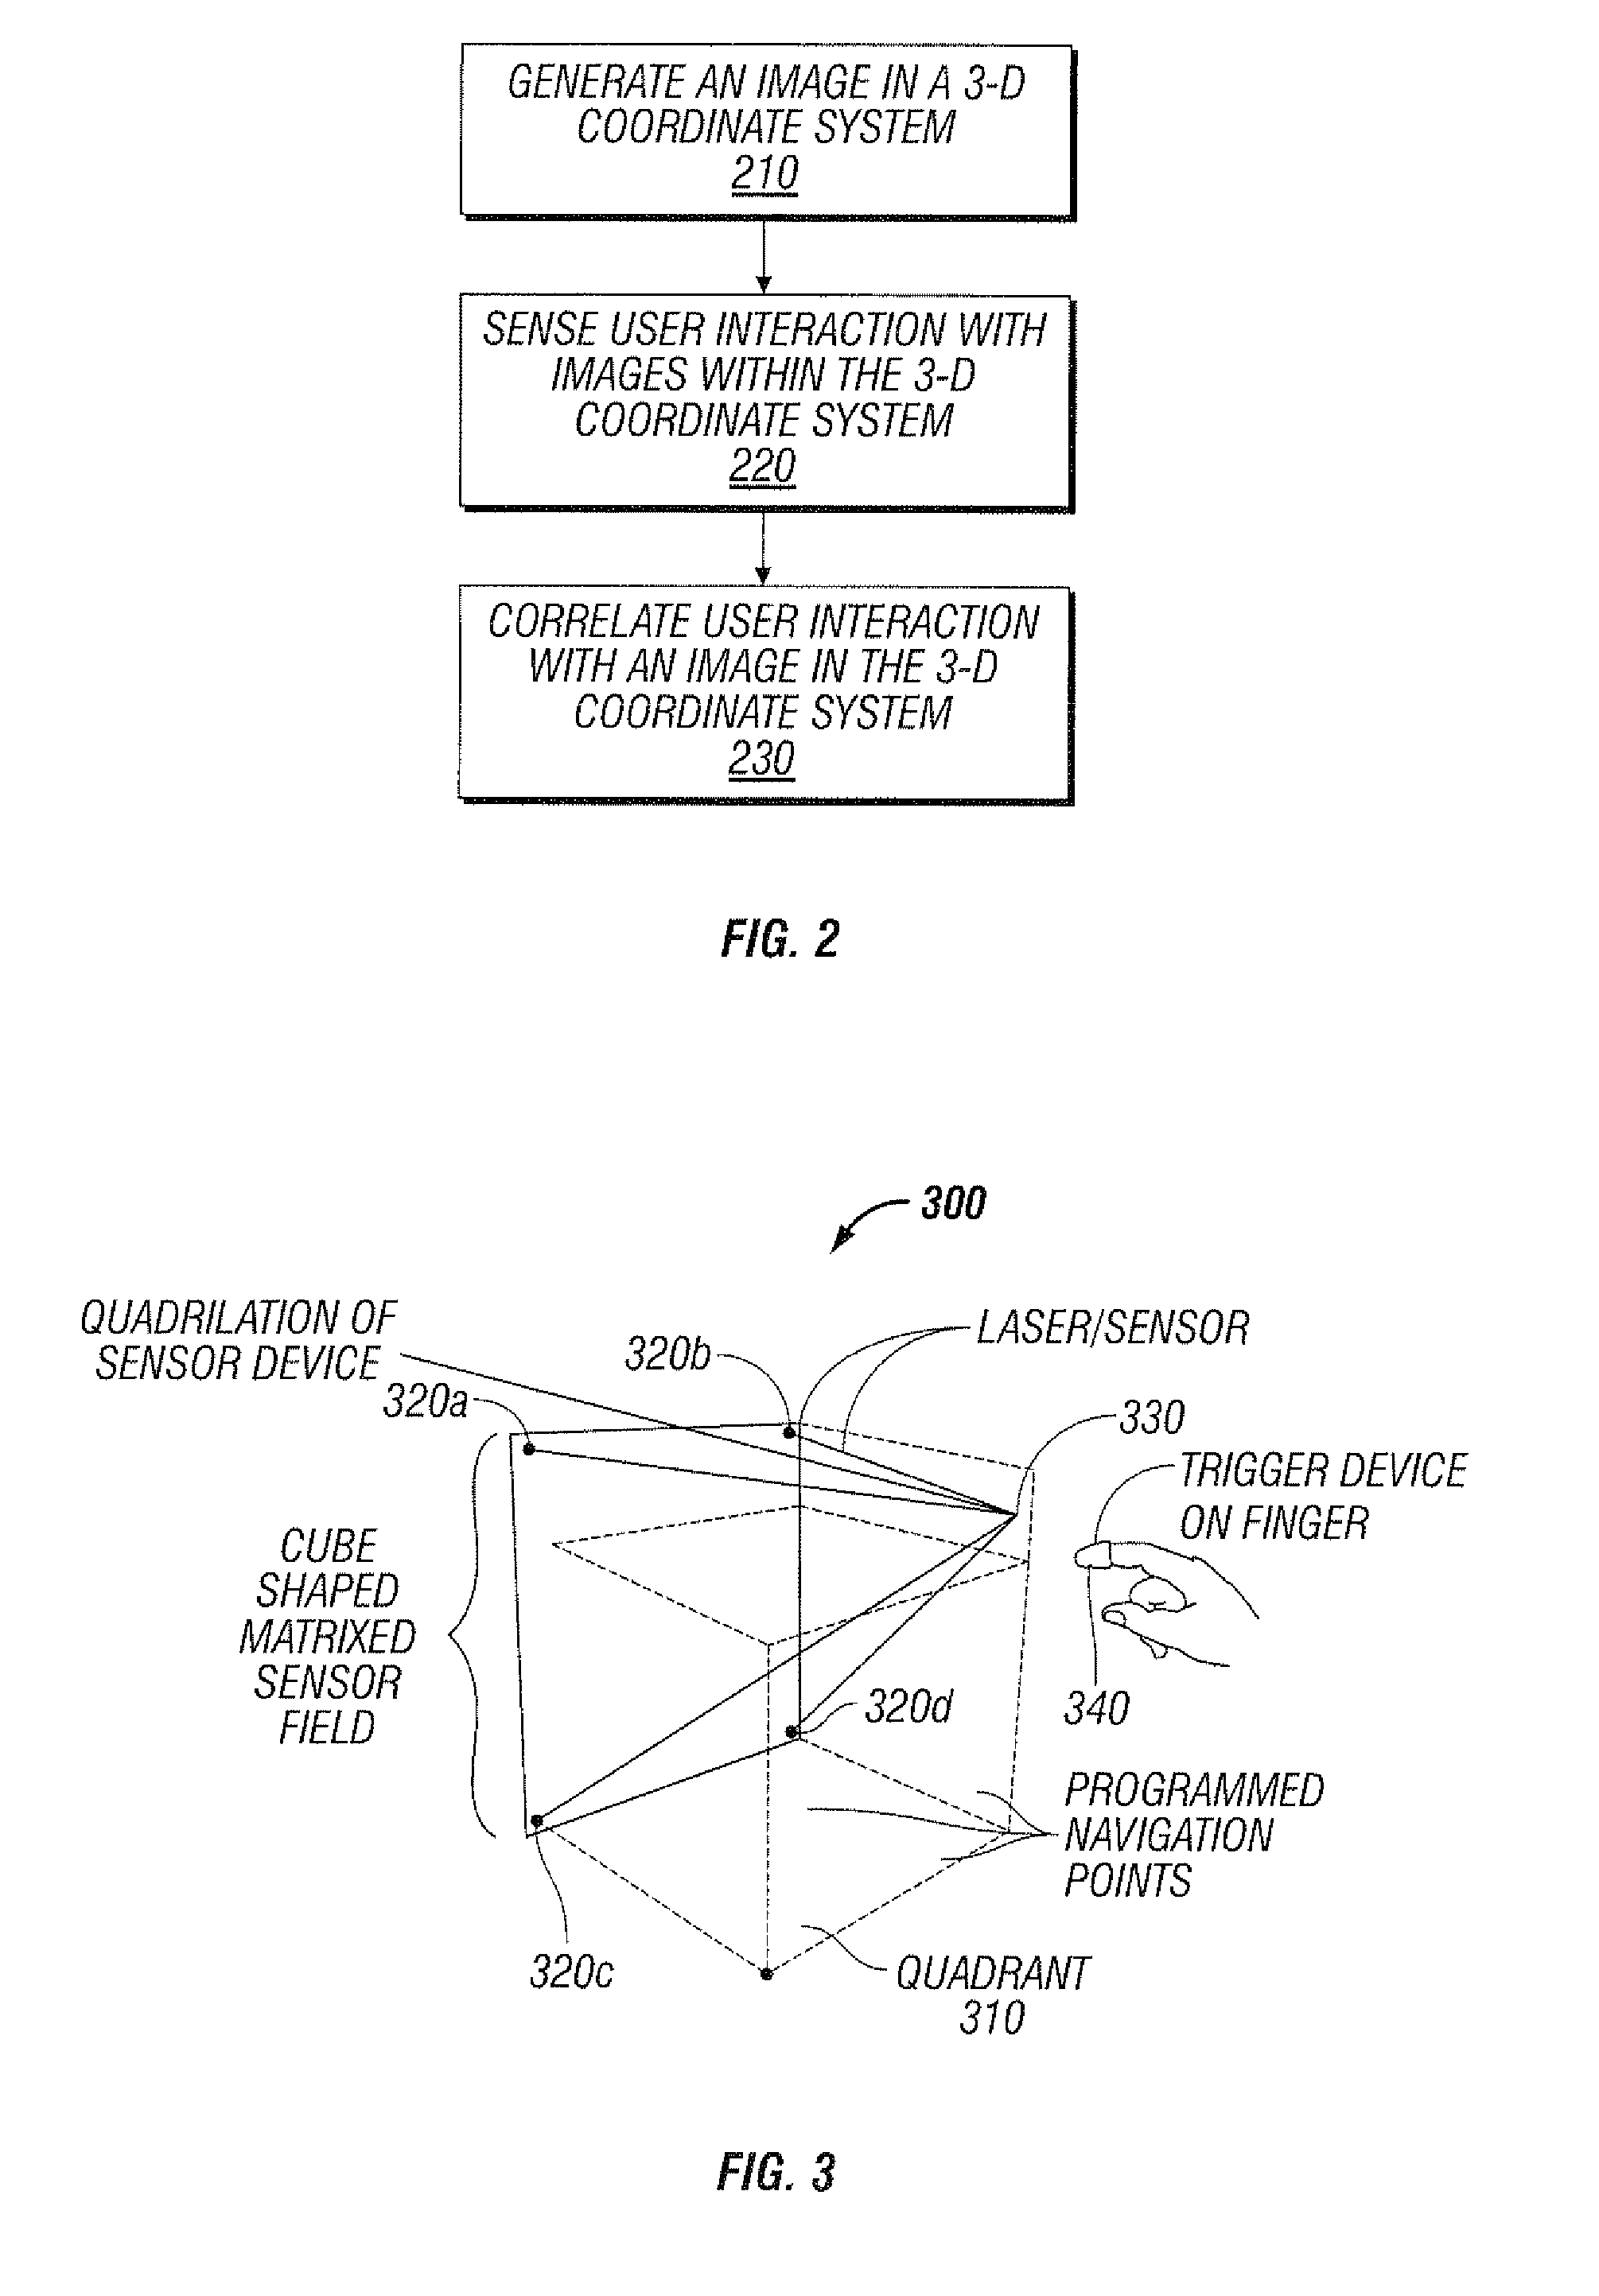 Digital, data, and multimedia user interface with a keyboard